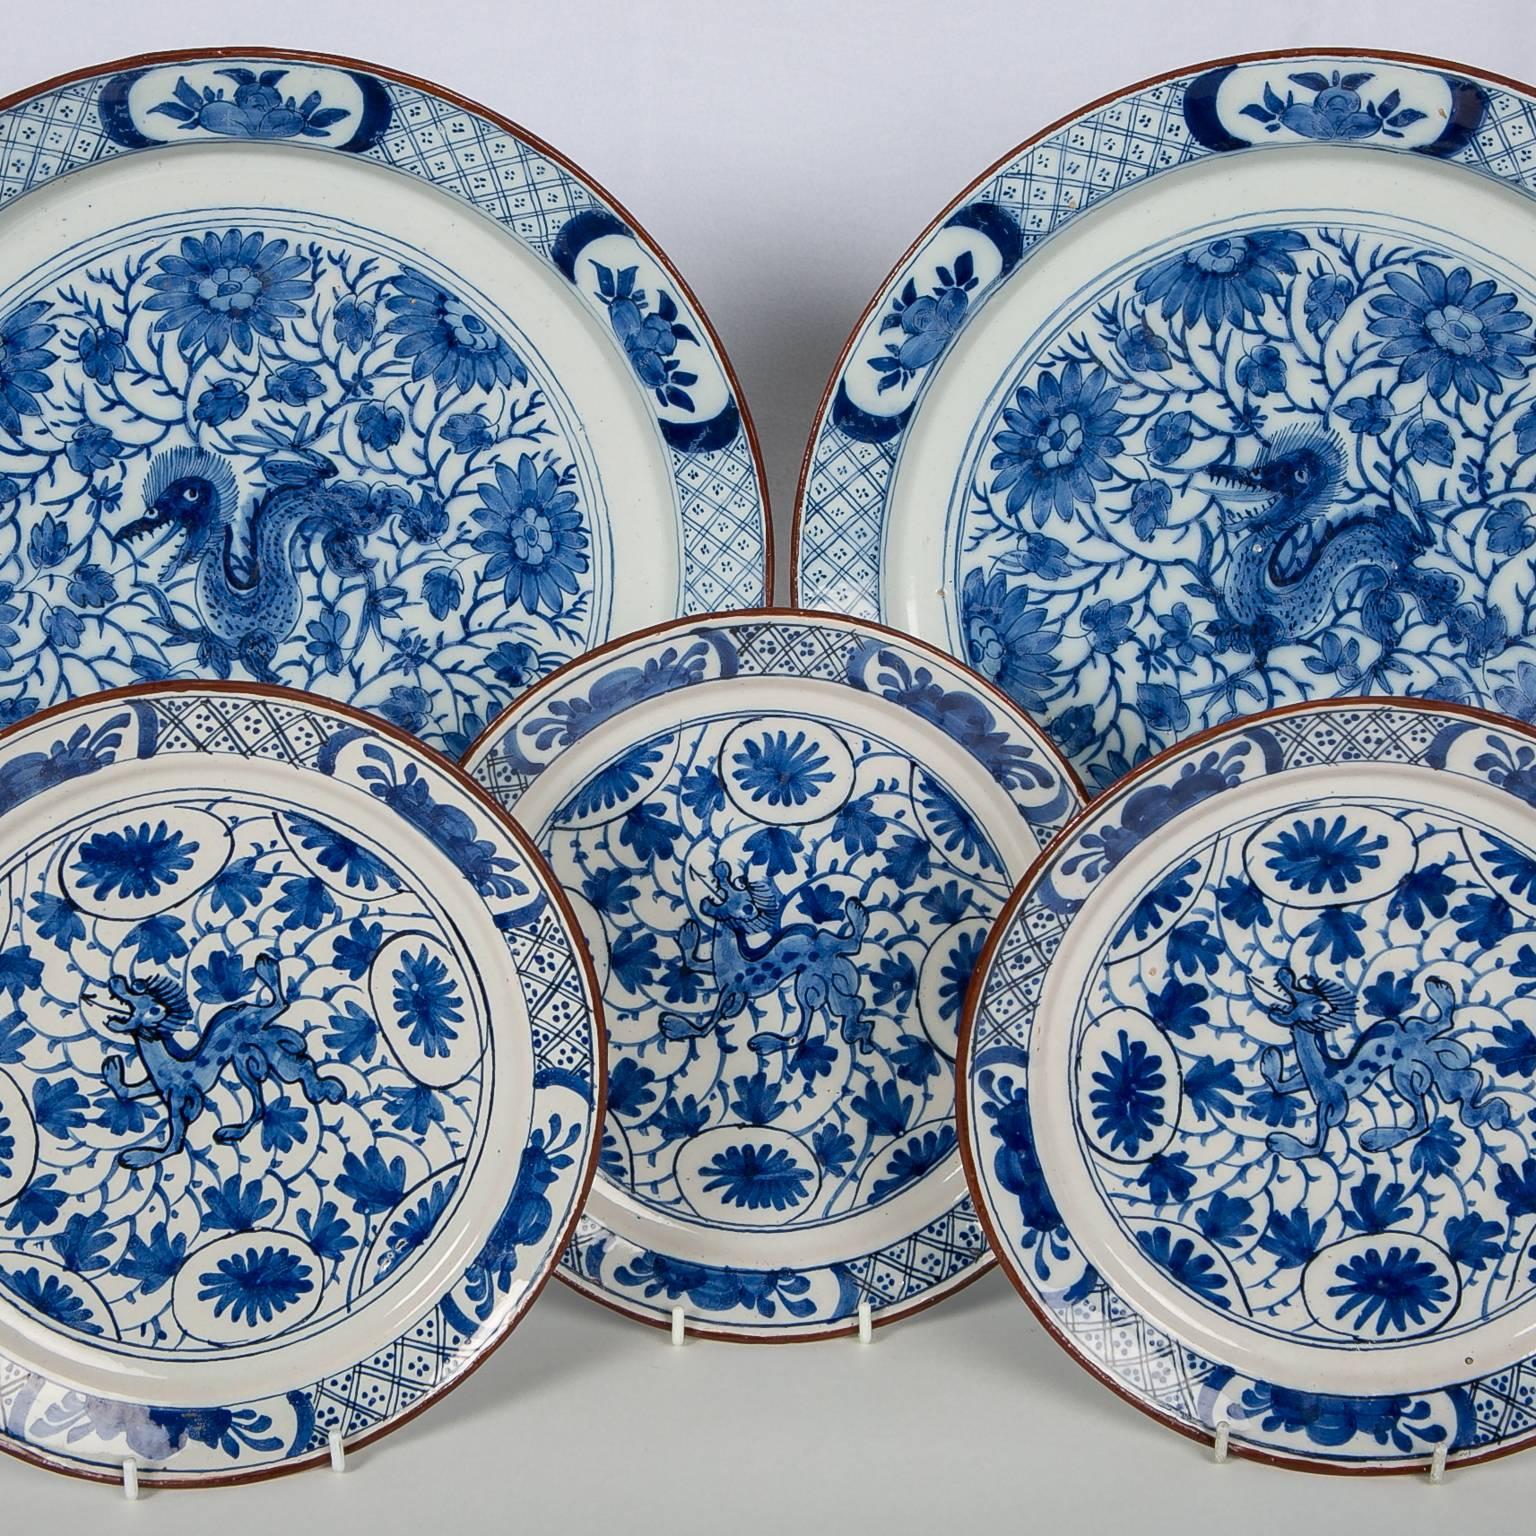 Late 18th Century Pair of Blue and White Delft Chargers